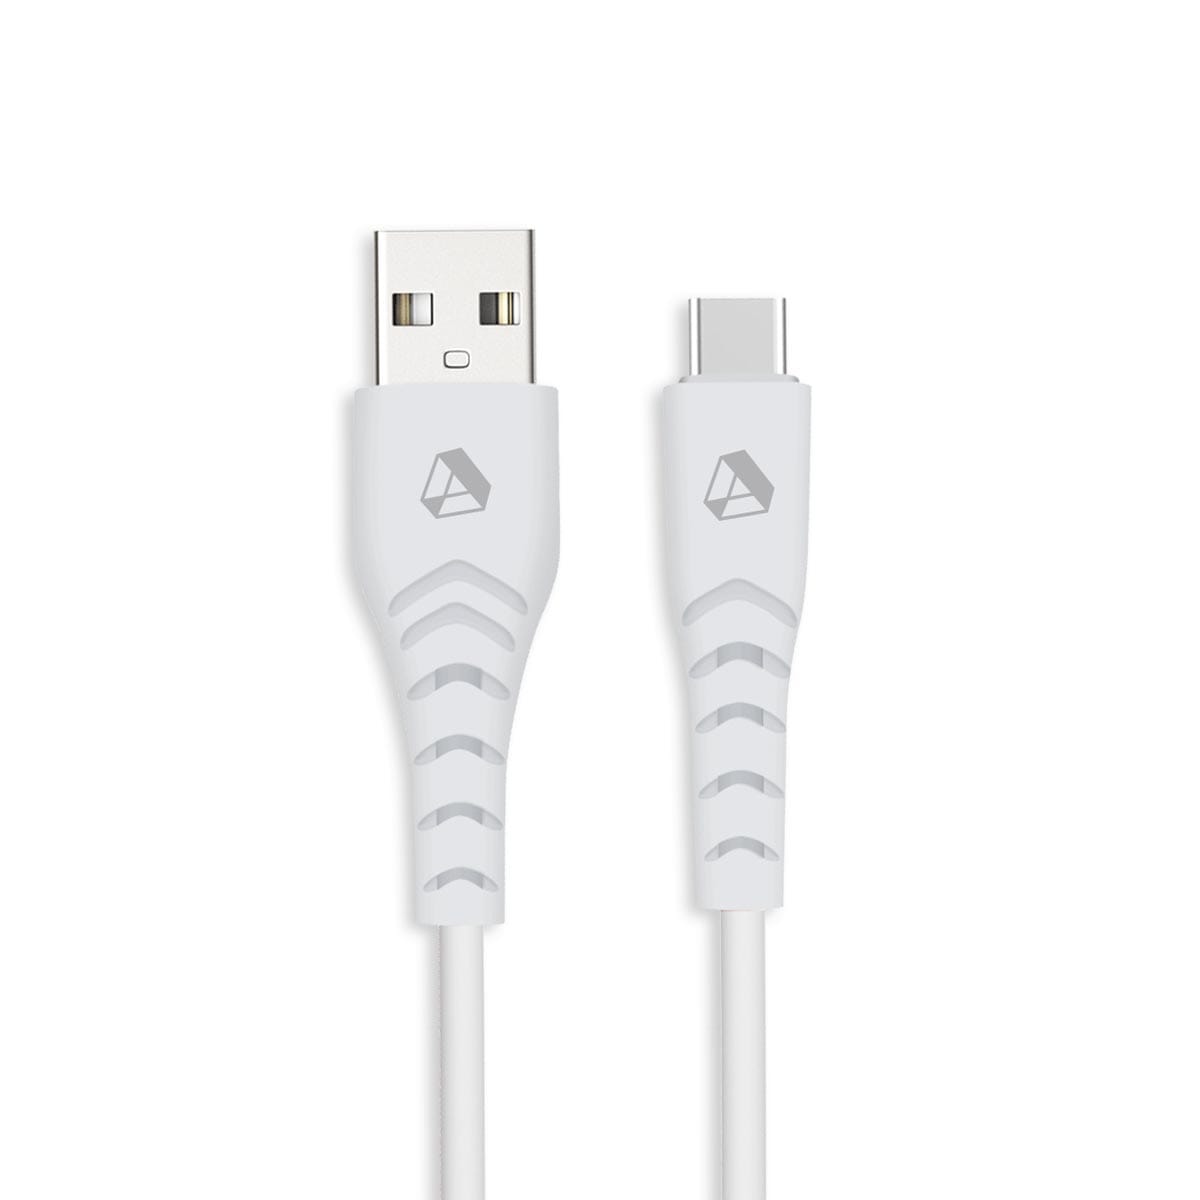 Eco-friendly USB-A to USB-C Cable - 1.5m: A Sustainable Solution for Your Charging Needs